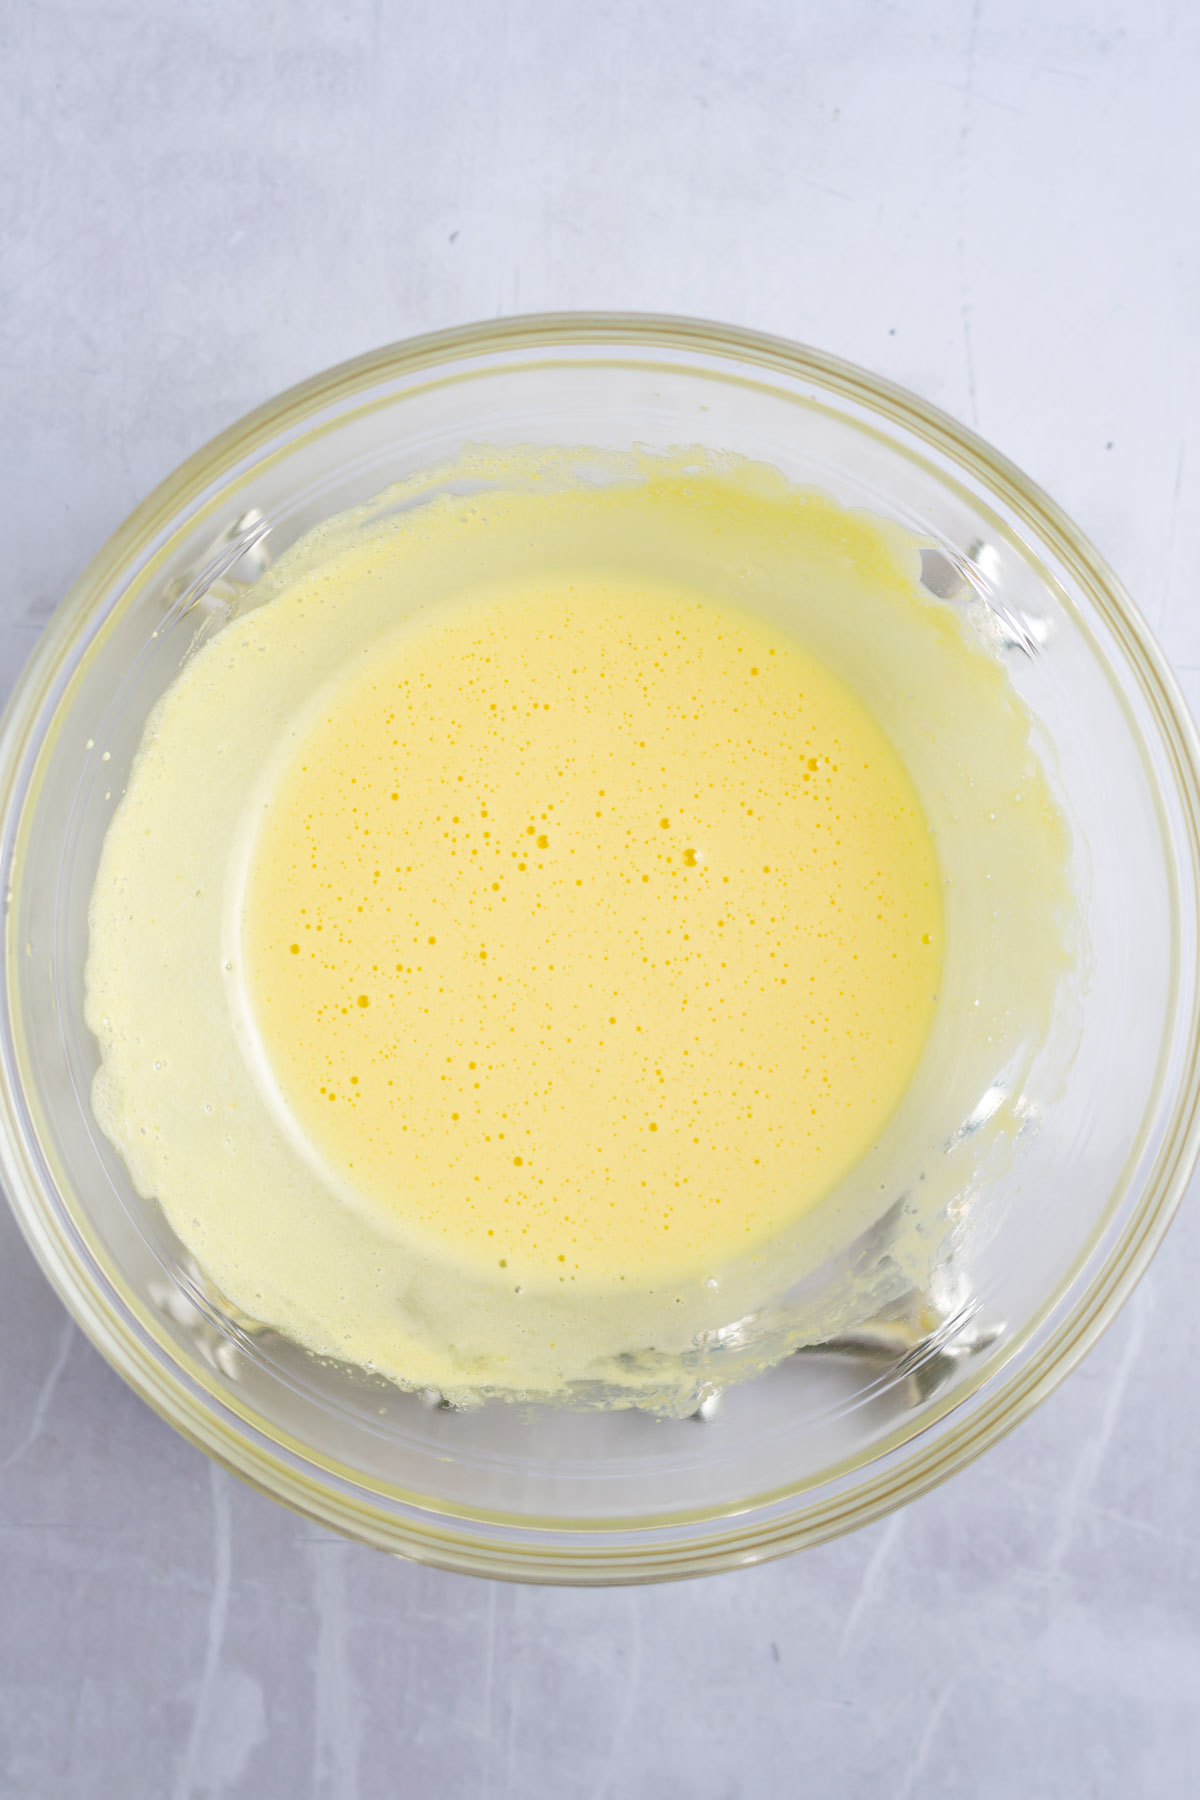 eggs and sugar whisked together until light and the sugar is dissolved.